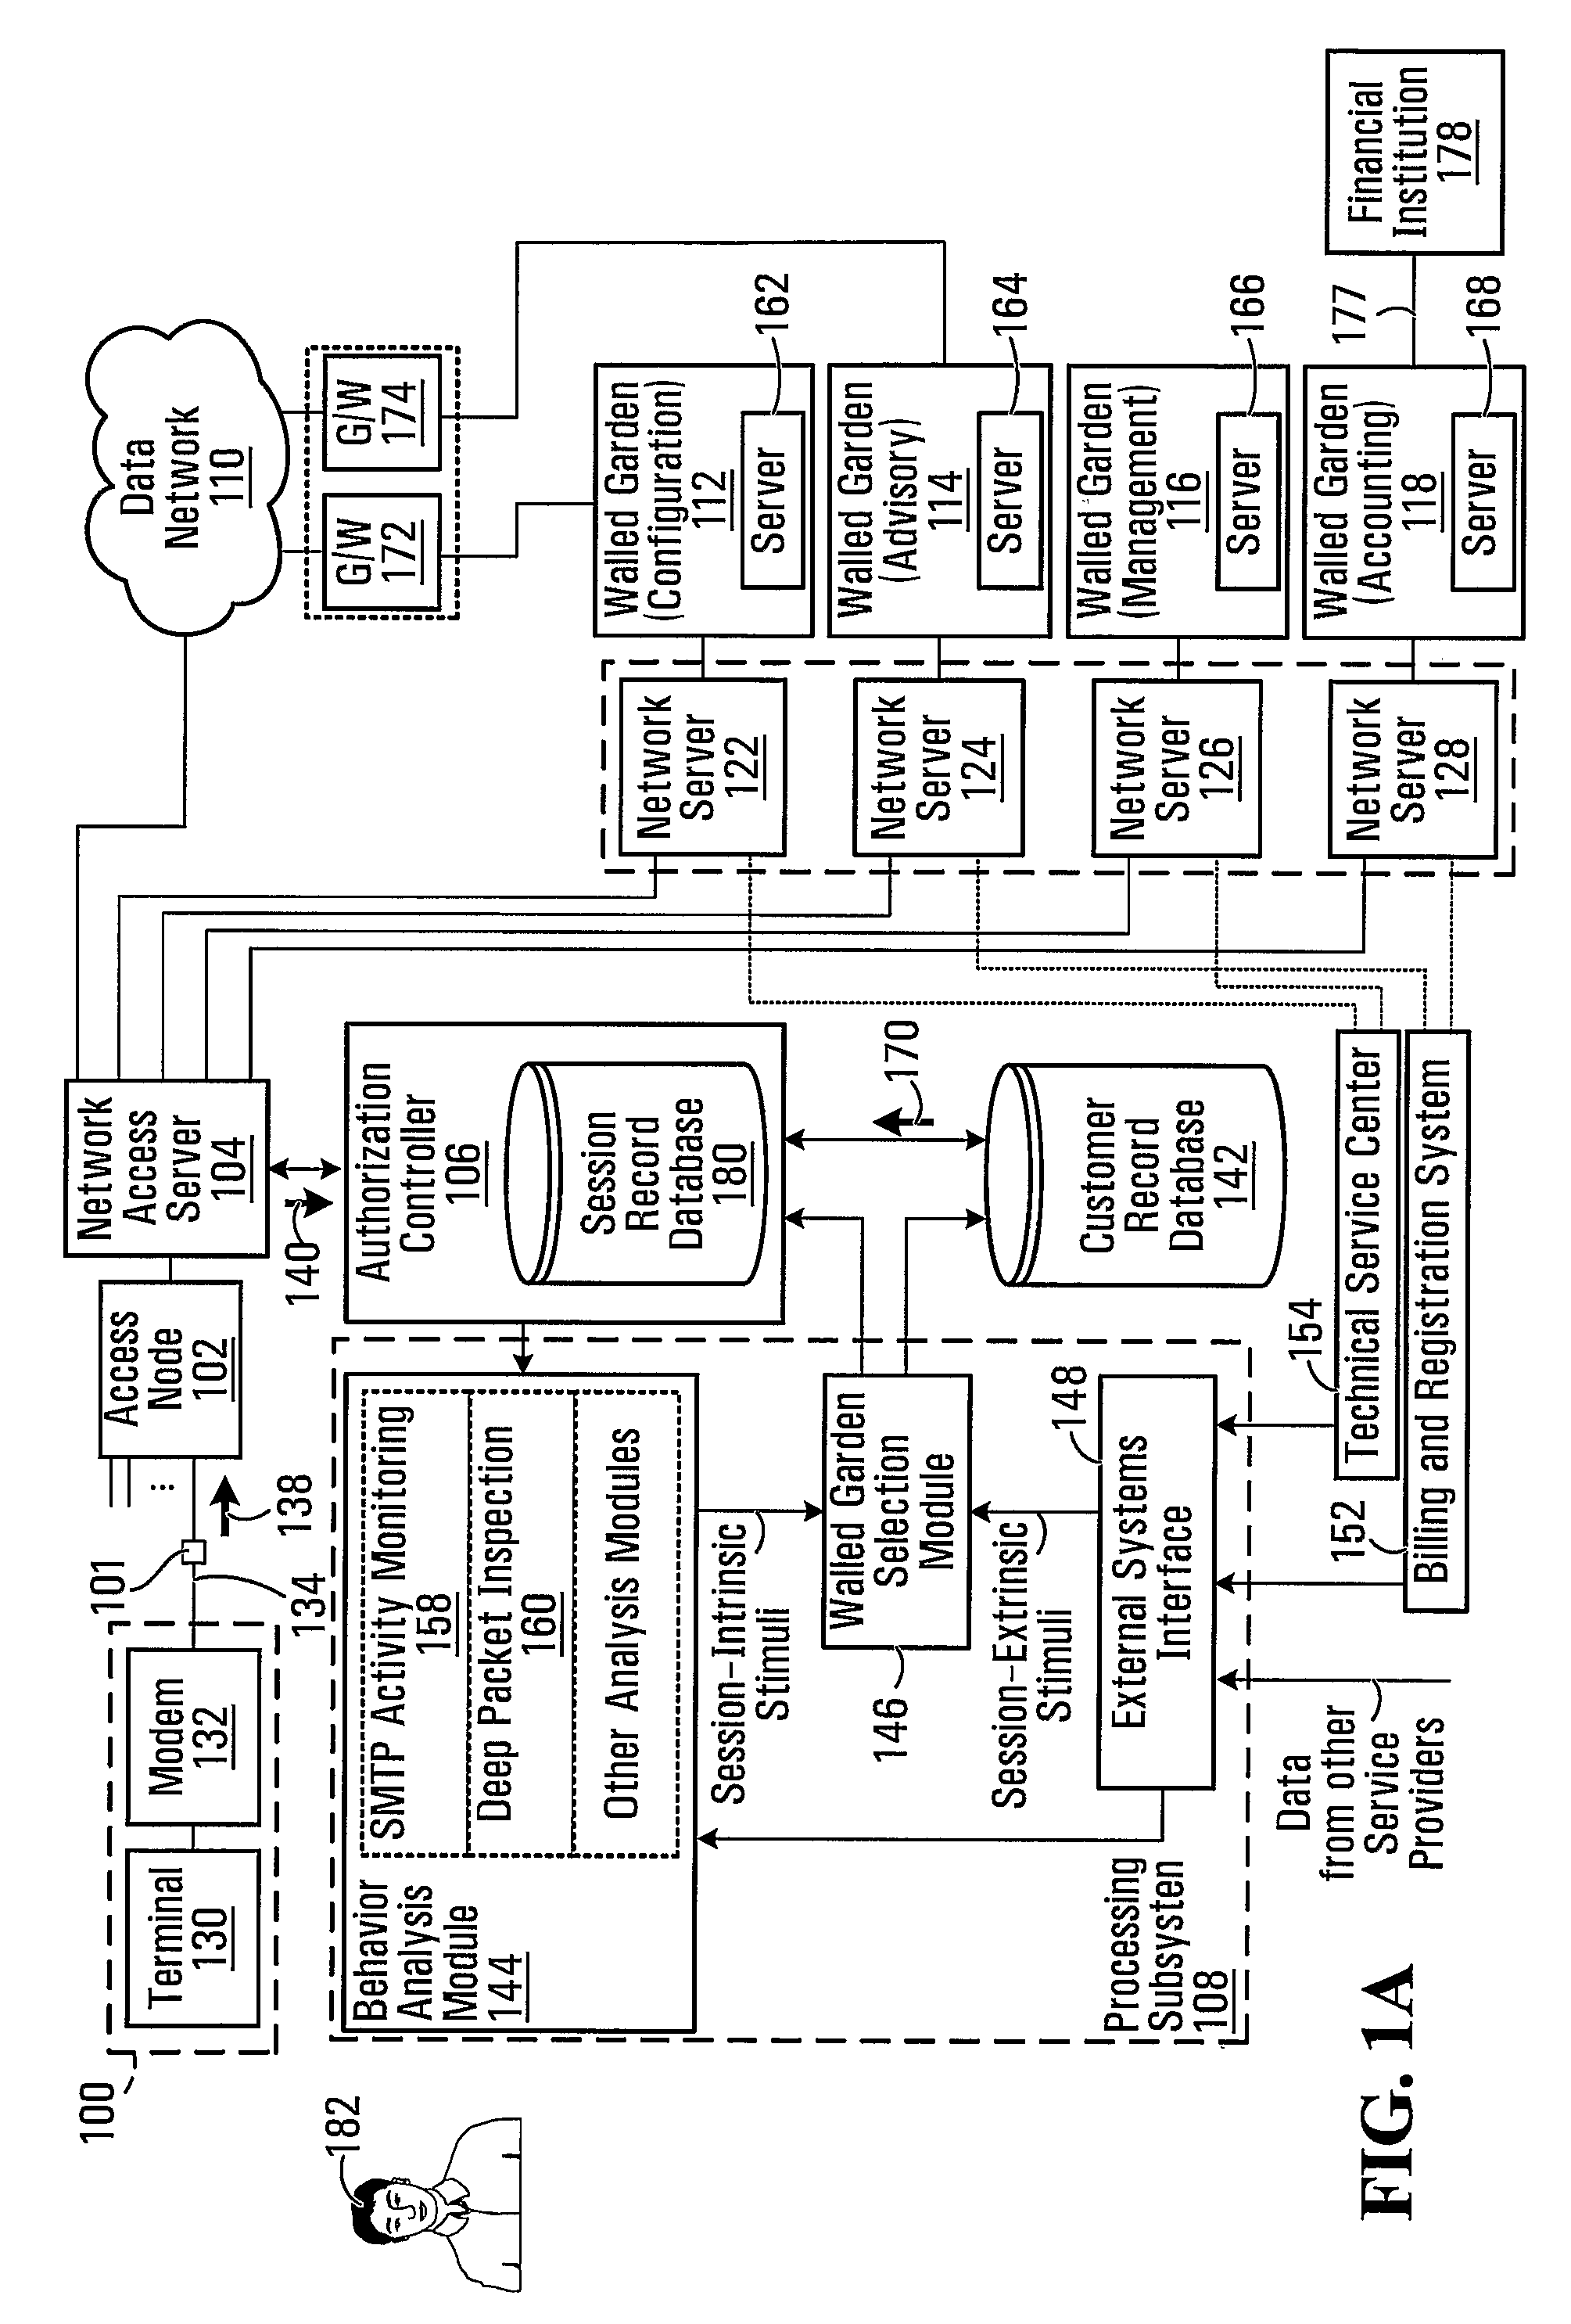 Systems, Methods and Computer-Readable Media for Regulating Remote Access to a Data Network